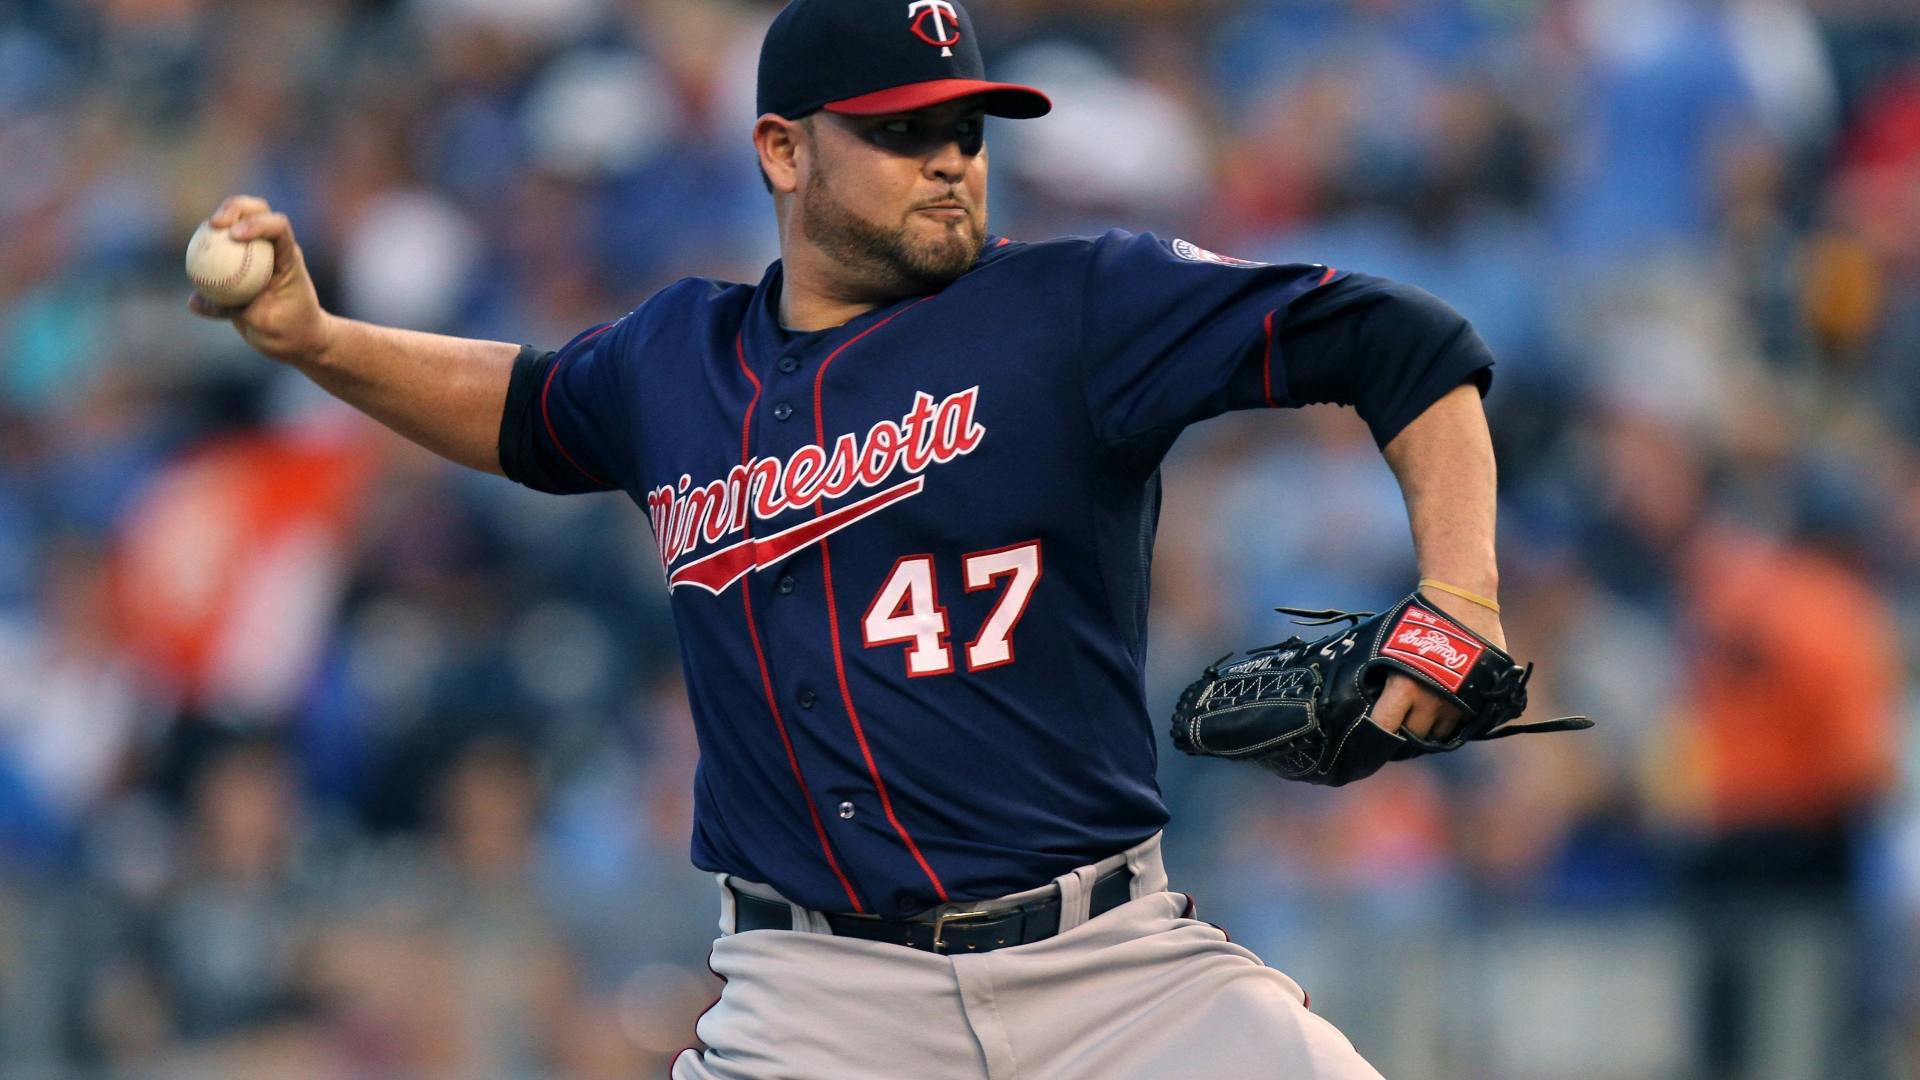 Twins pitcher Ricky Nolasco says he felt sick Tuesday, but sweated it out in KC's 90-degree heat and pitched 7 shutout innings.